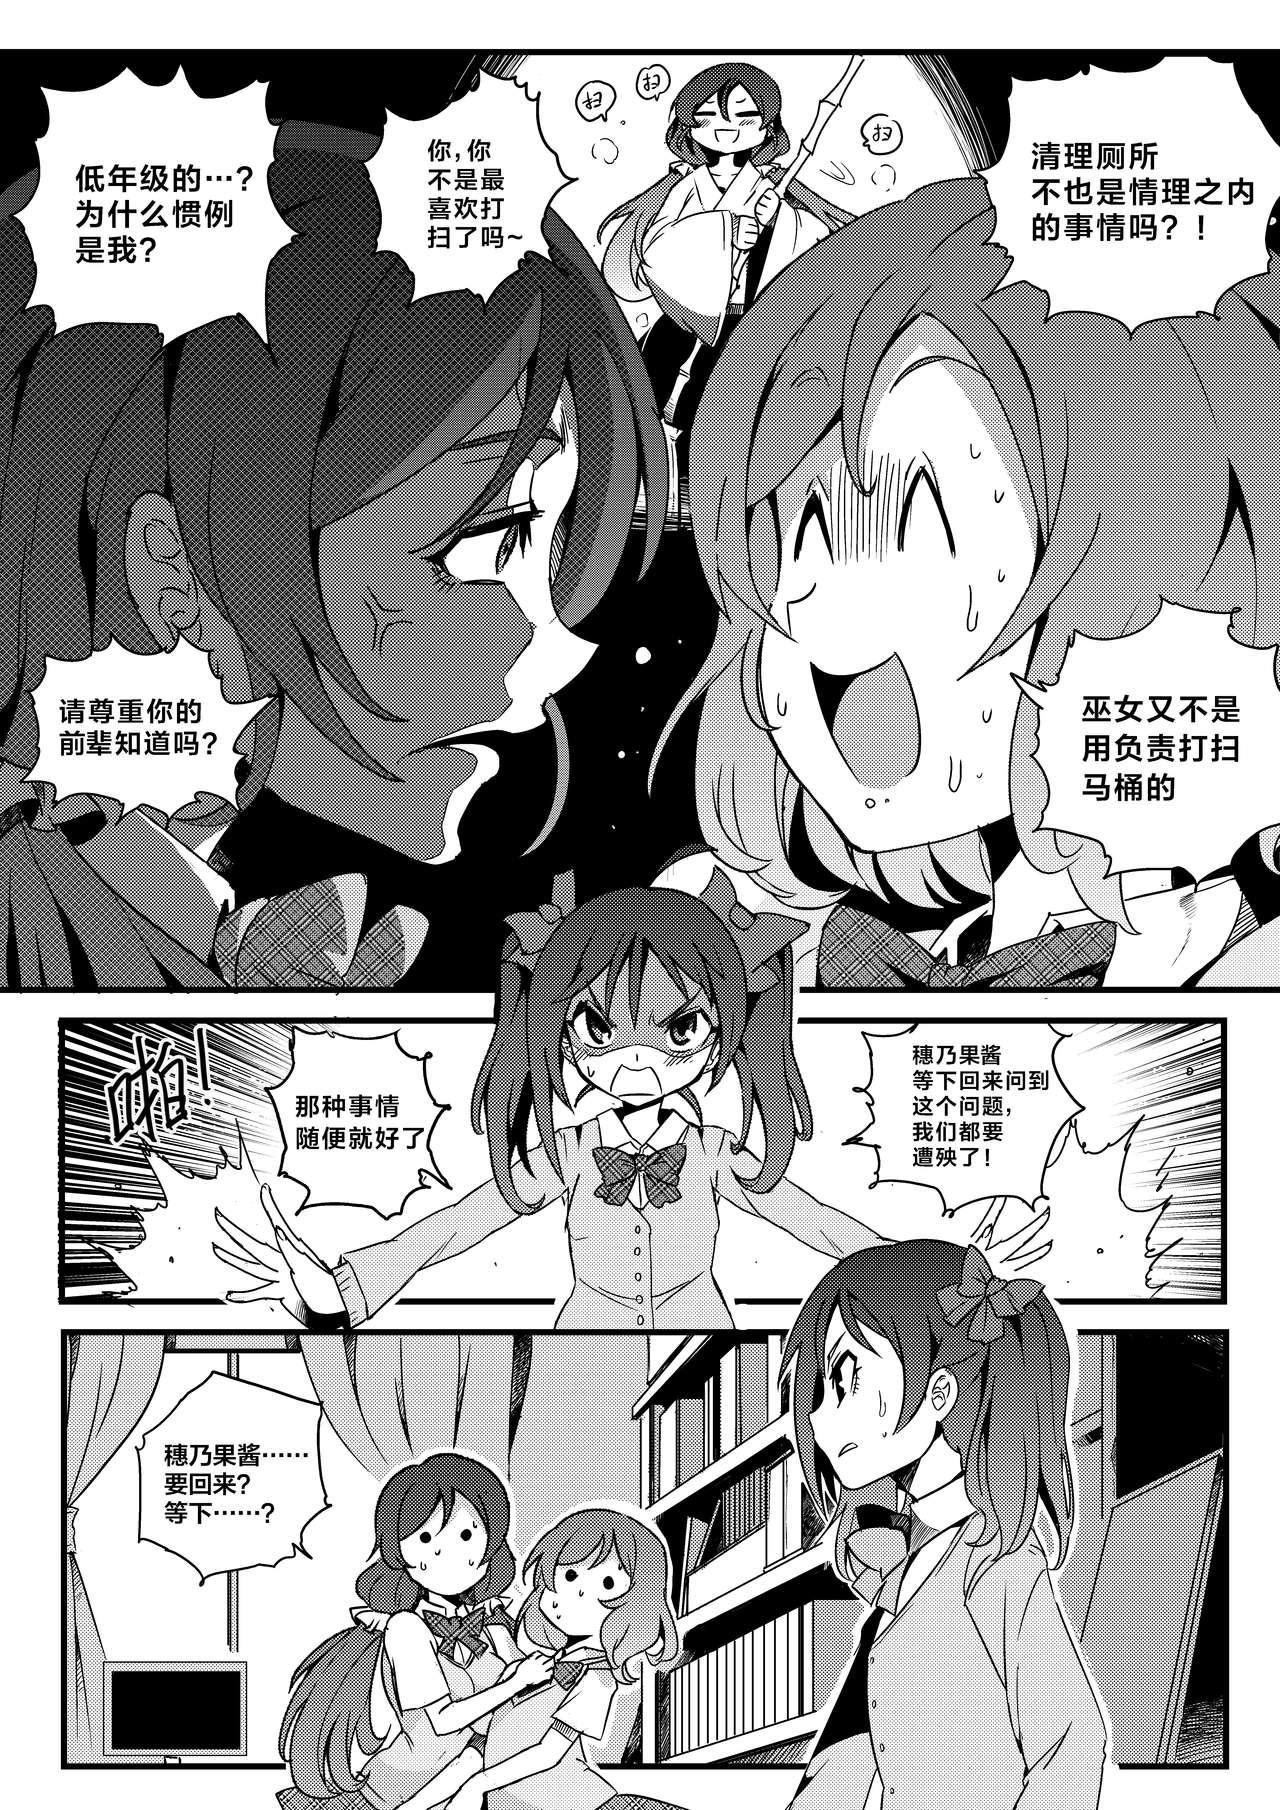 Wet Cunt 果胆卯威 - Kantai collection The idolmaster Love live With - Page 4